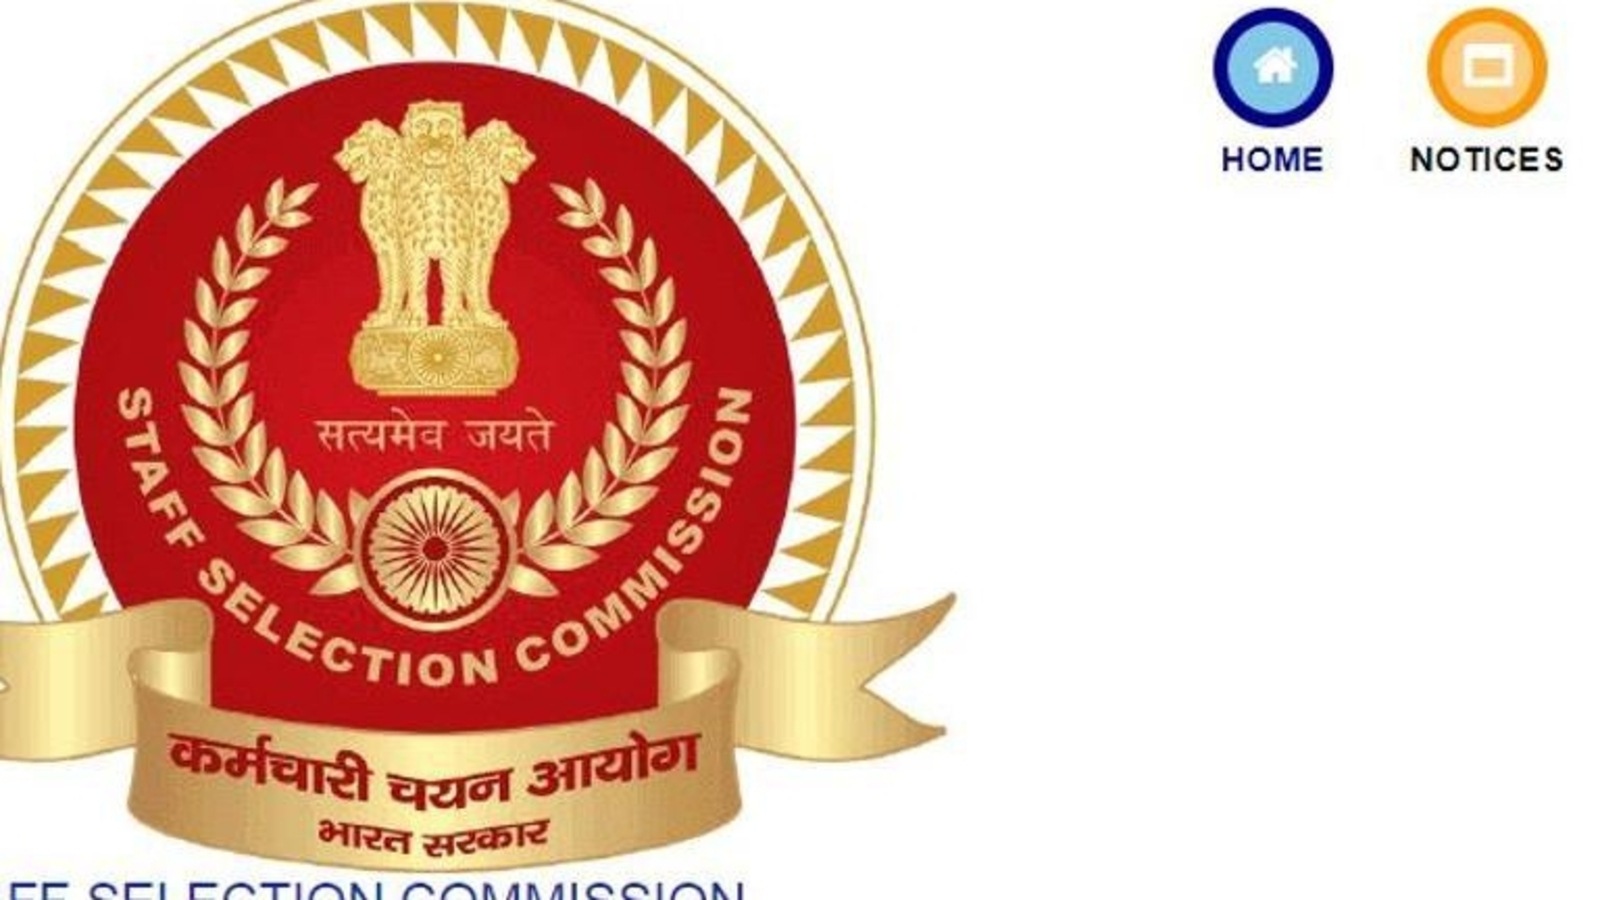 SSC CHSL 2021 Exam: Important notice issued for applicants